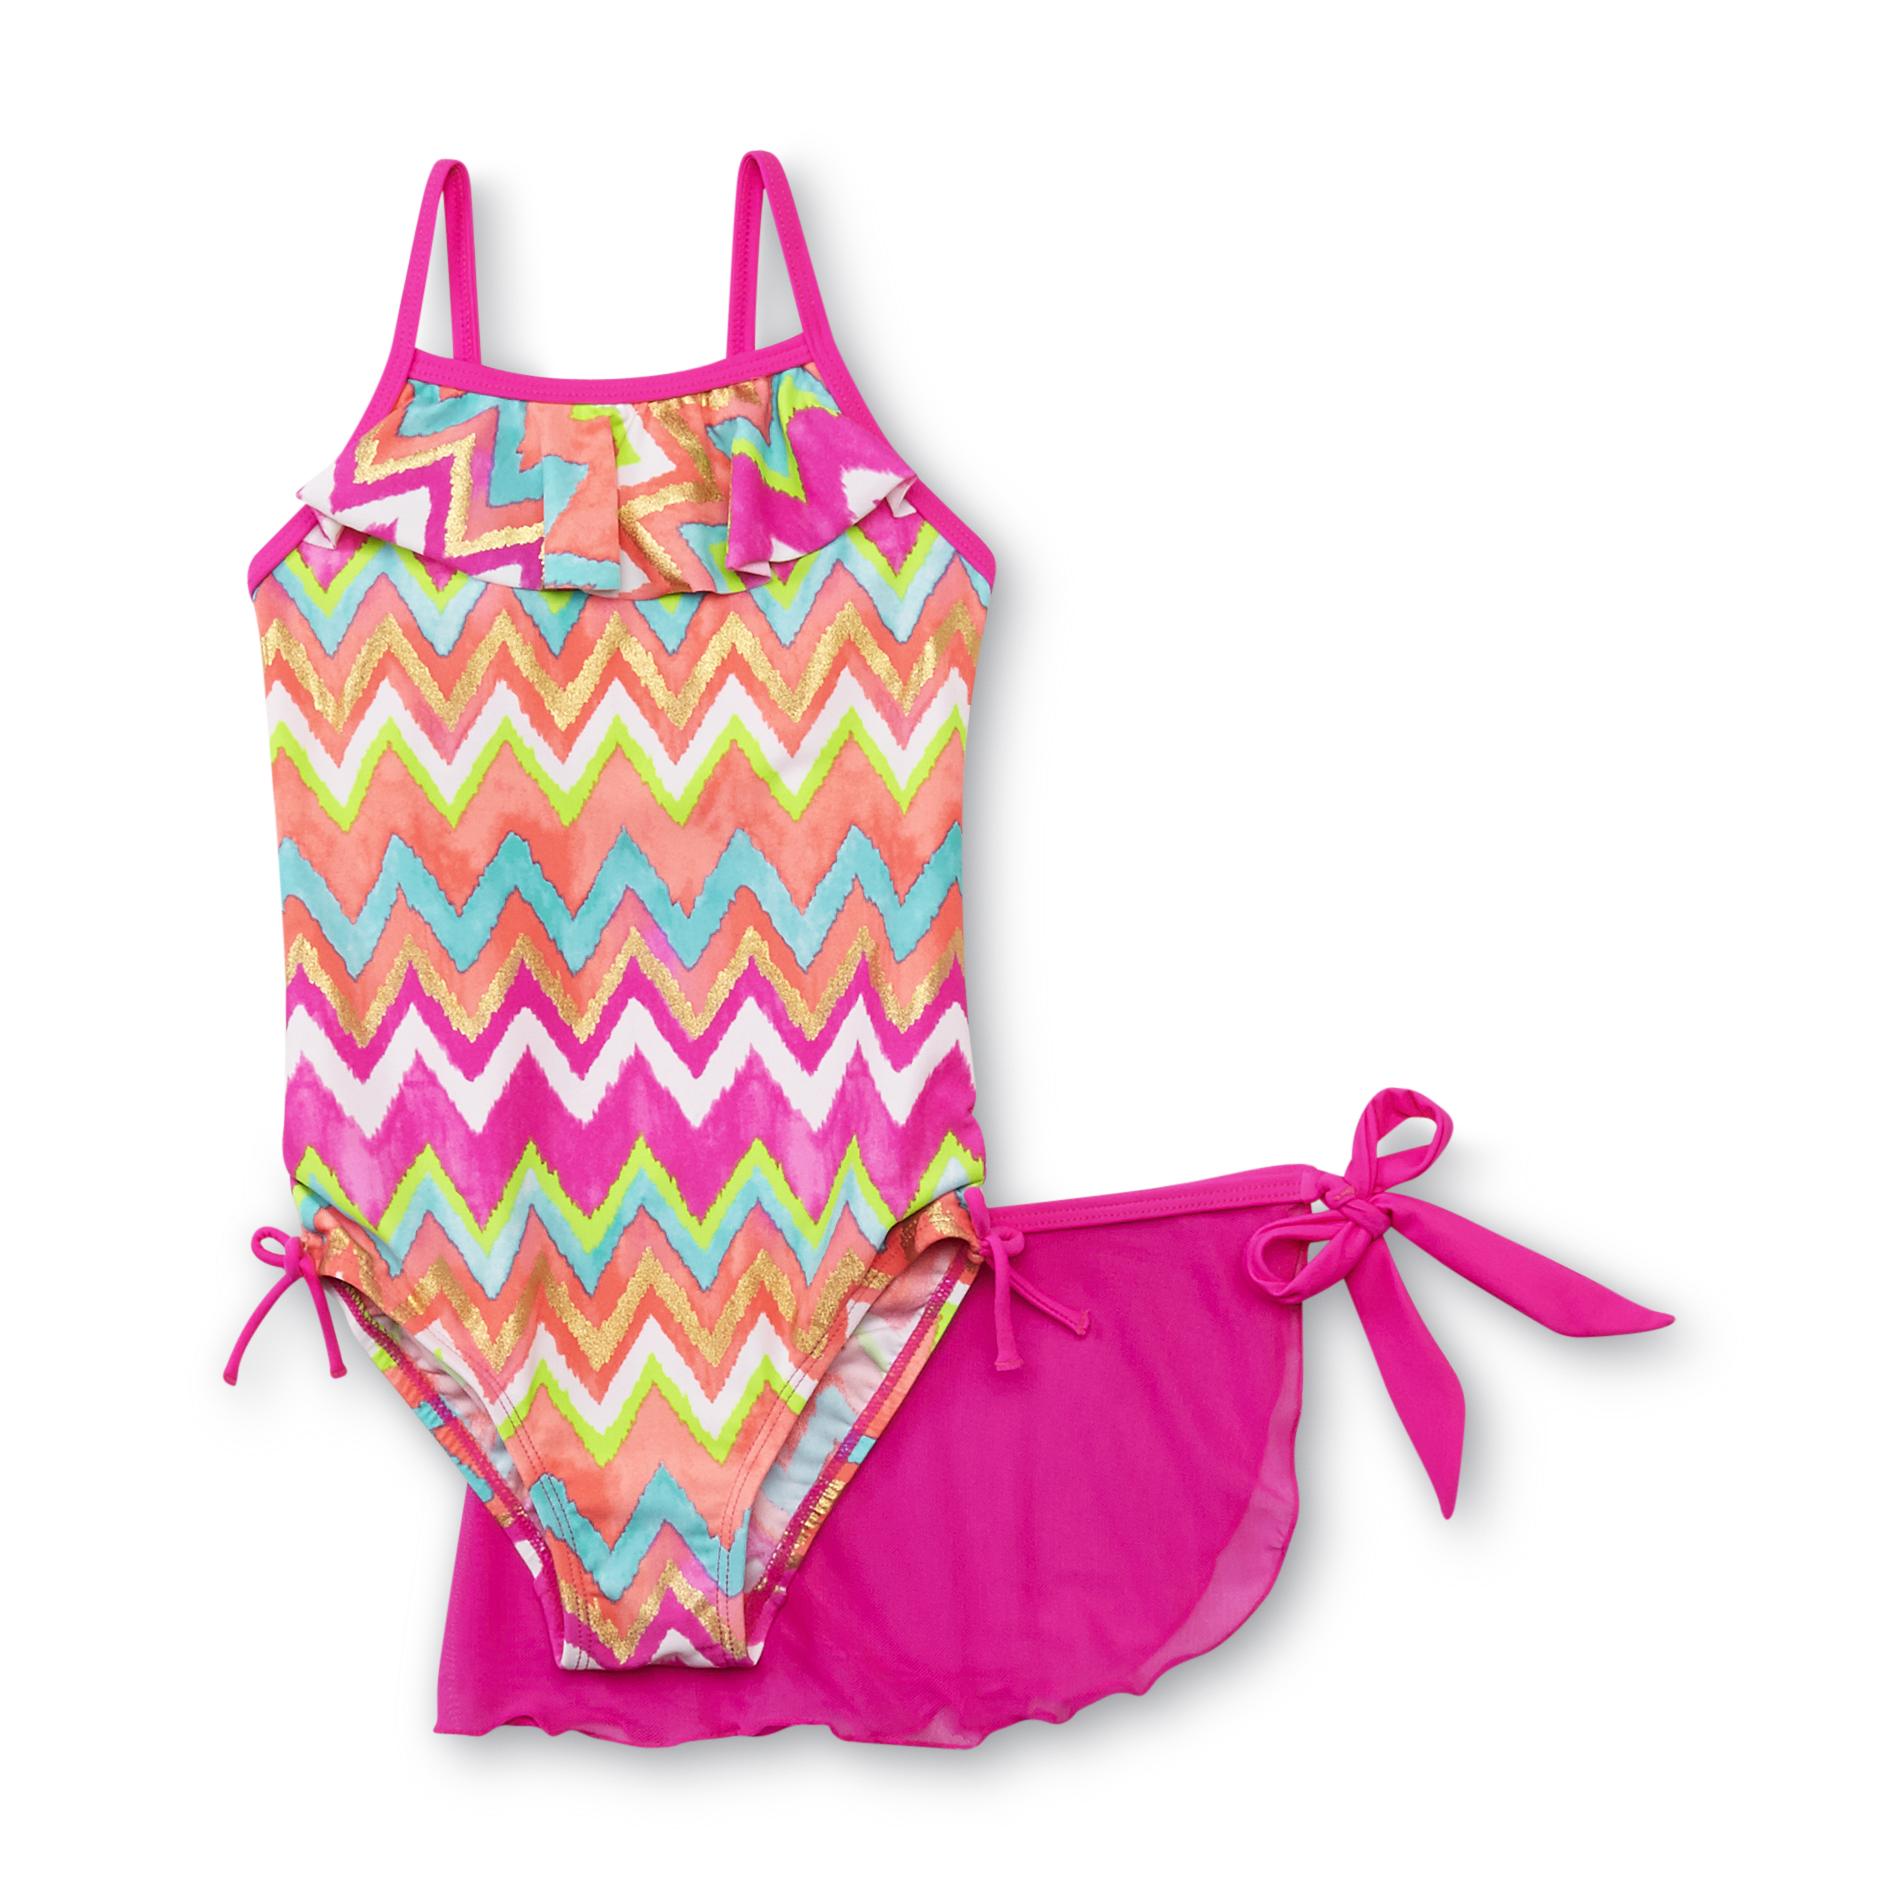 Girl's Swimsuit & Cover-Up - Chevron Striped